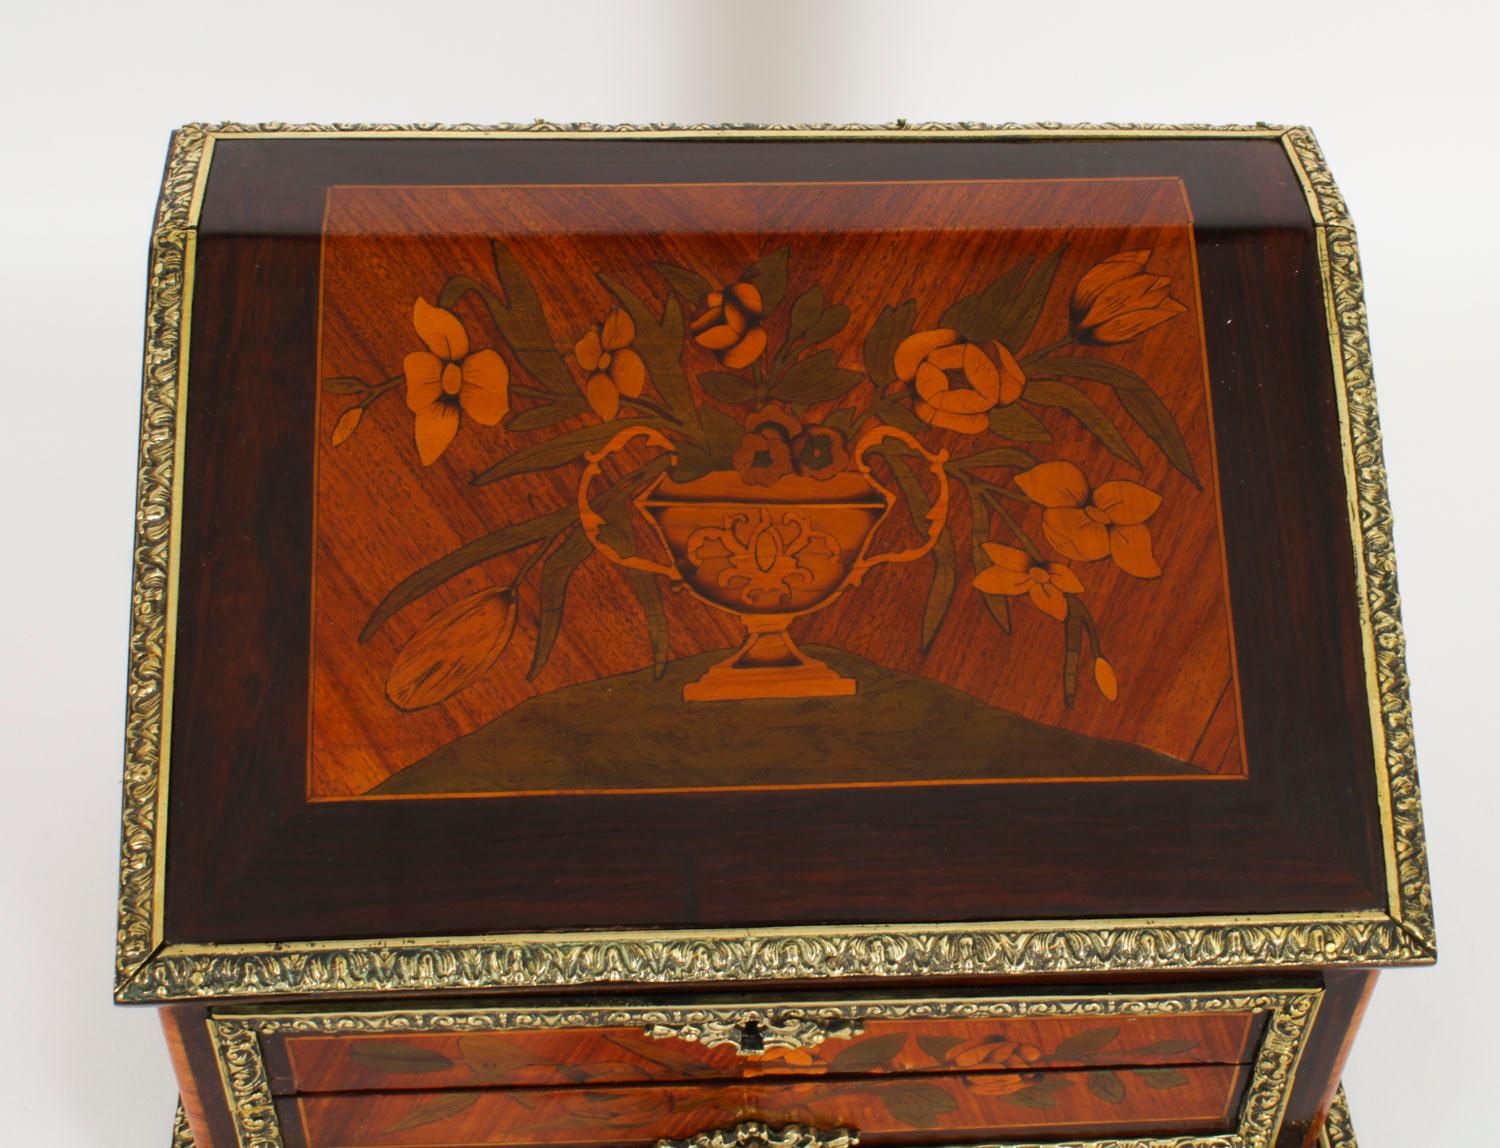 This is a wonderful antique French Gonçalo Alves marquetry and ormolu mounted casket, circa 1860 in date.

The casket of bureau form has a lift up top and is inlaid with a marquetry flower vase  which opens to a plain interior lined with marbled